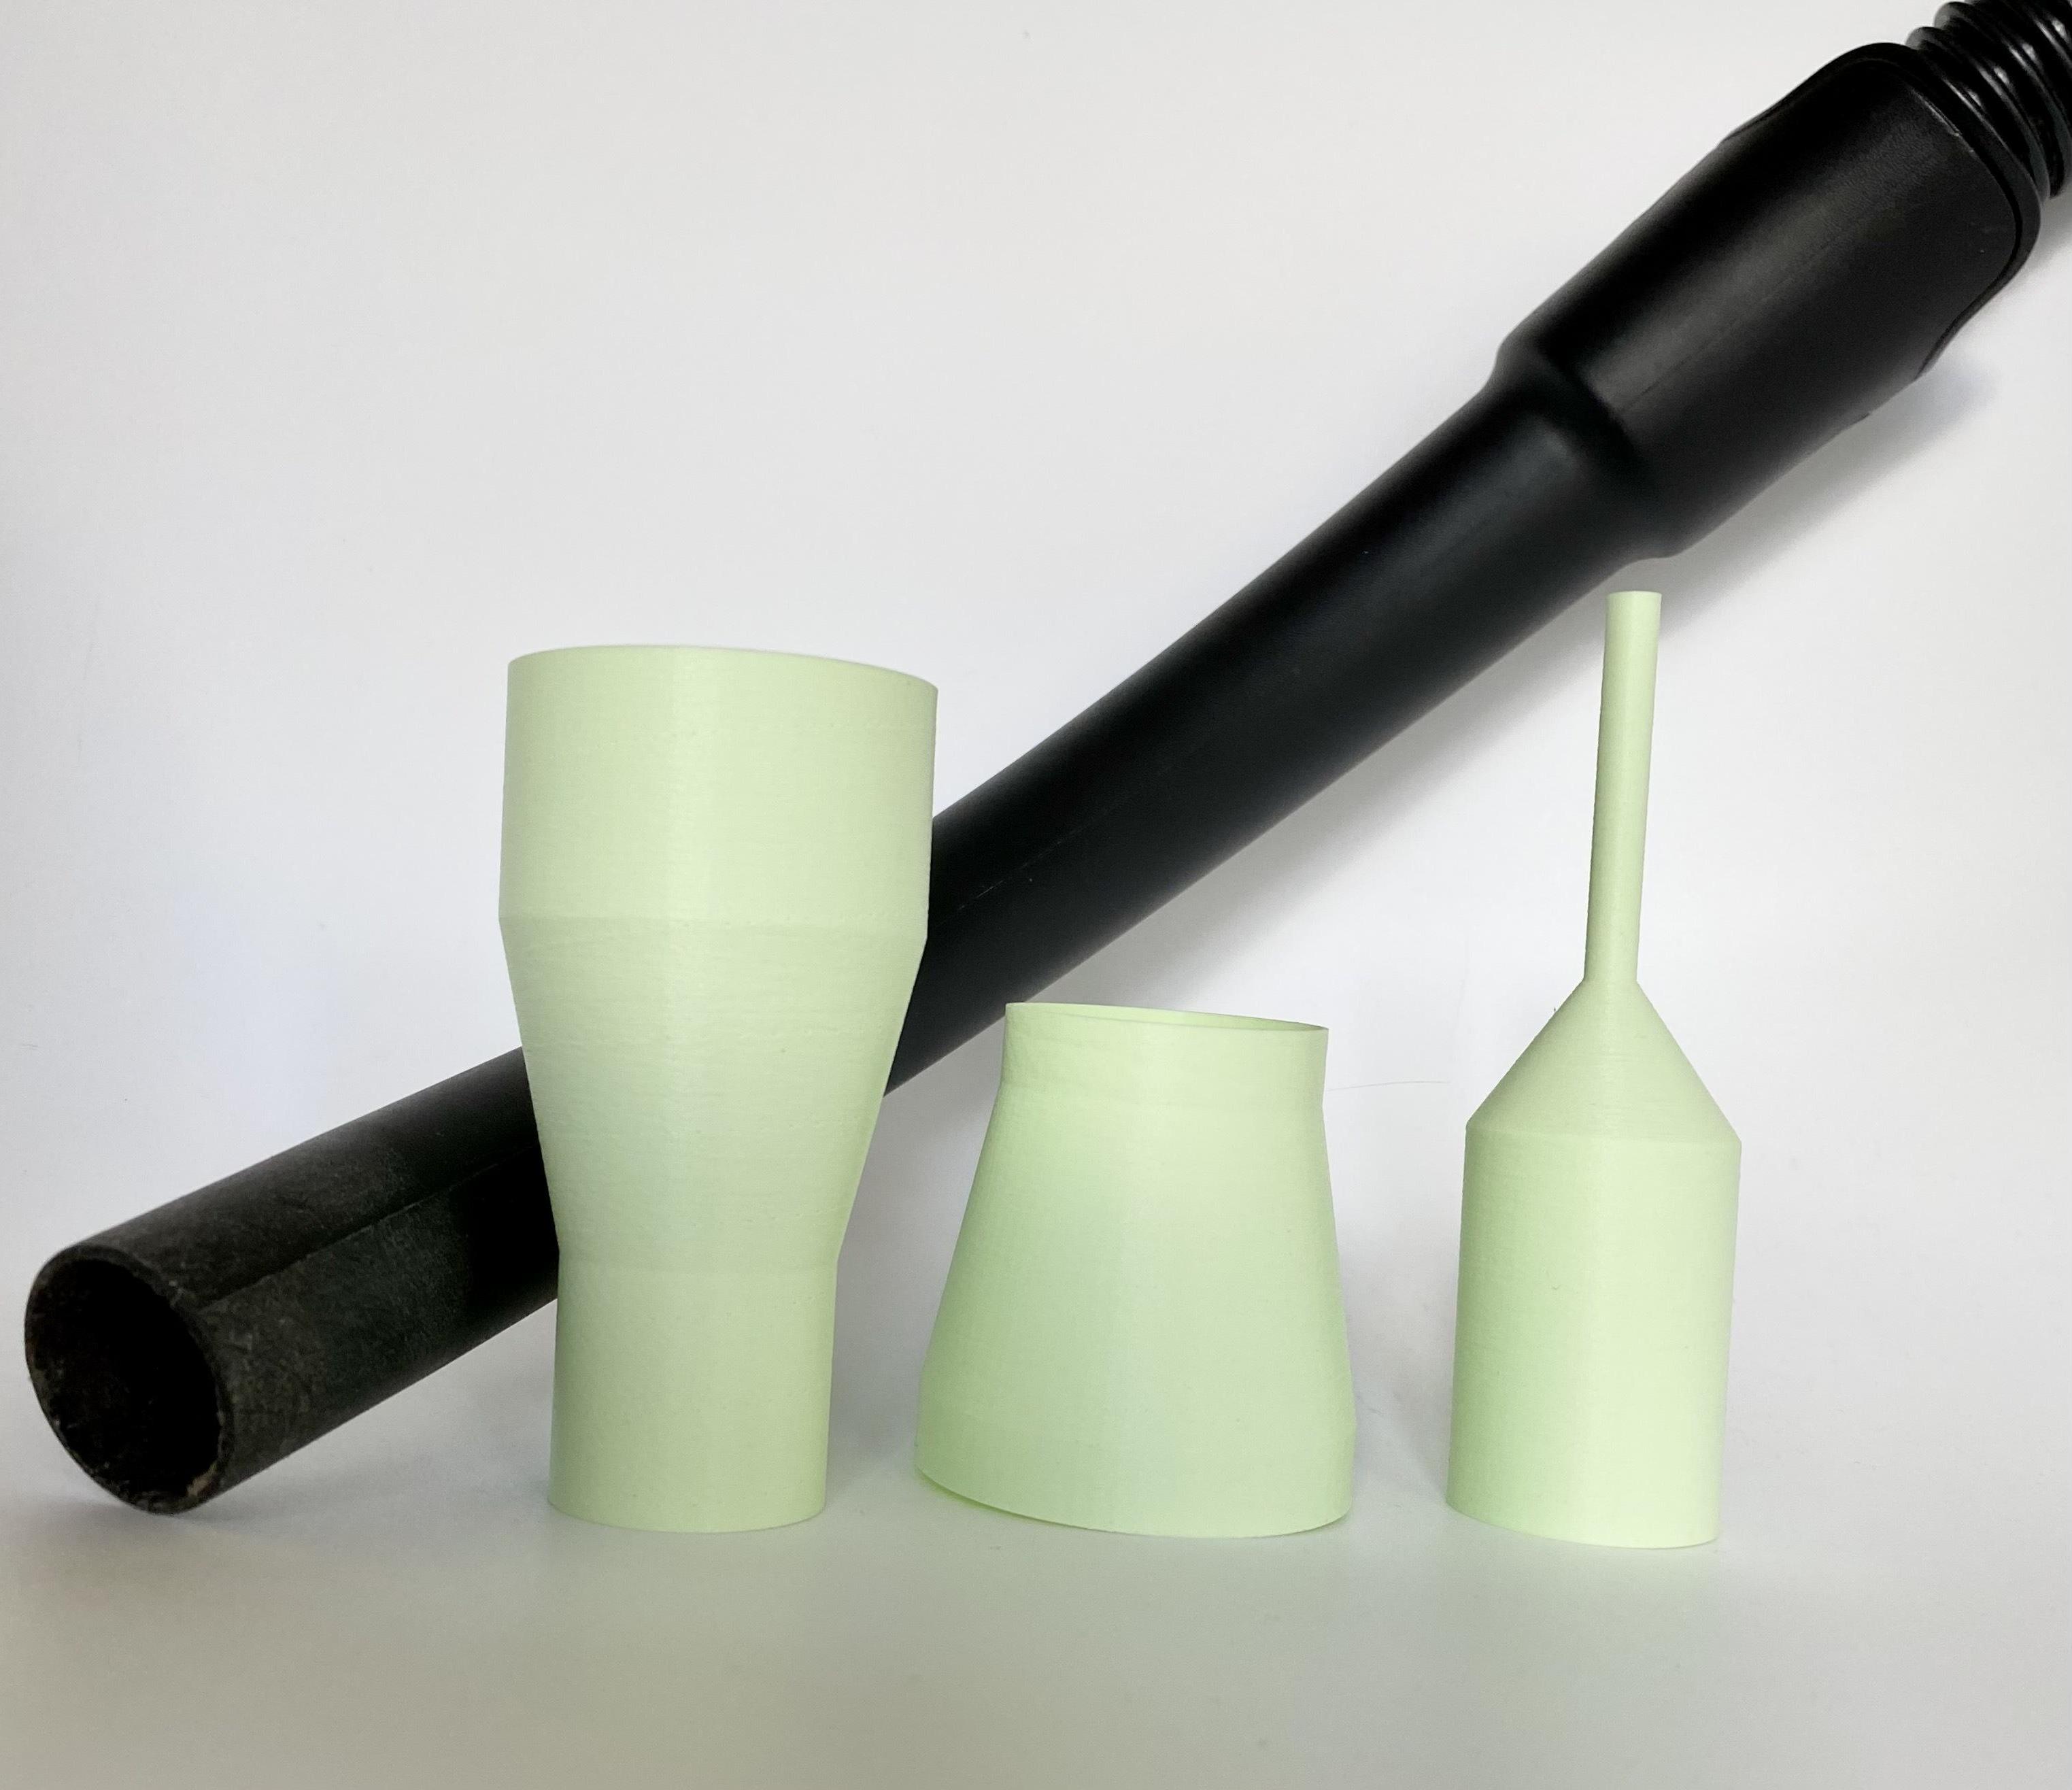 Customizable Vacuum Cleaner Adapters to Make Your Own Nozzle, or Connect to Anything Else.